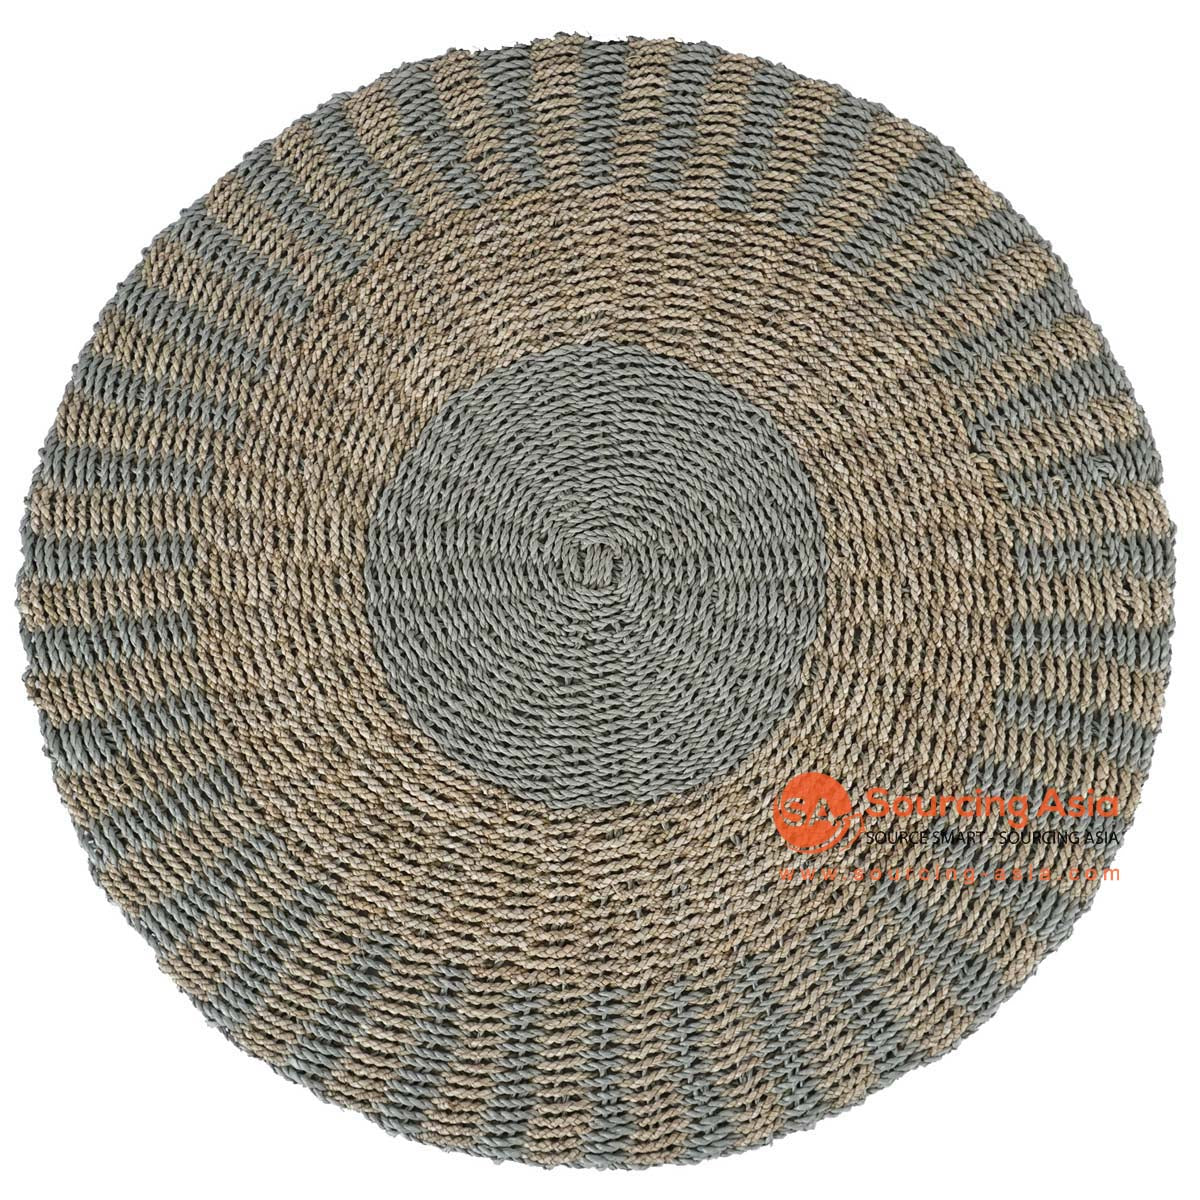 HBSC364 NATURAL AND BLUE SEAGRASS ROUND RUG